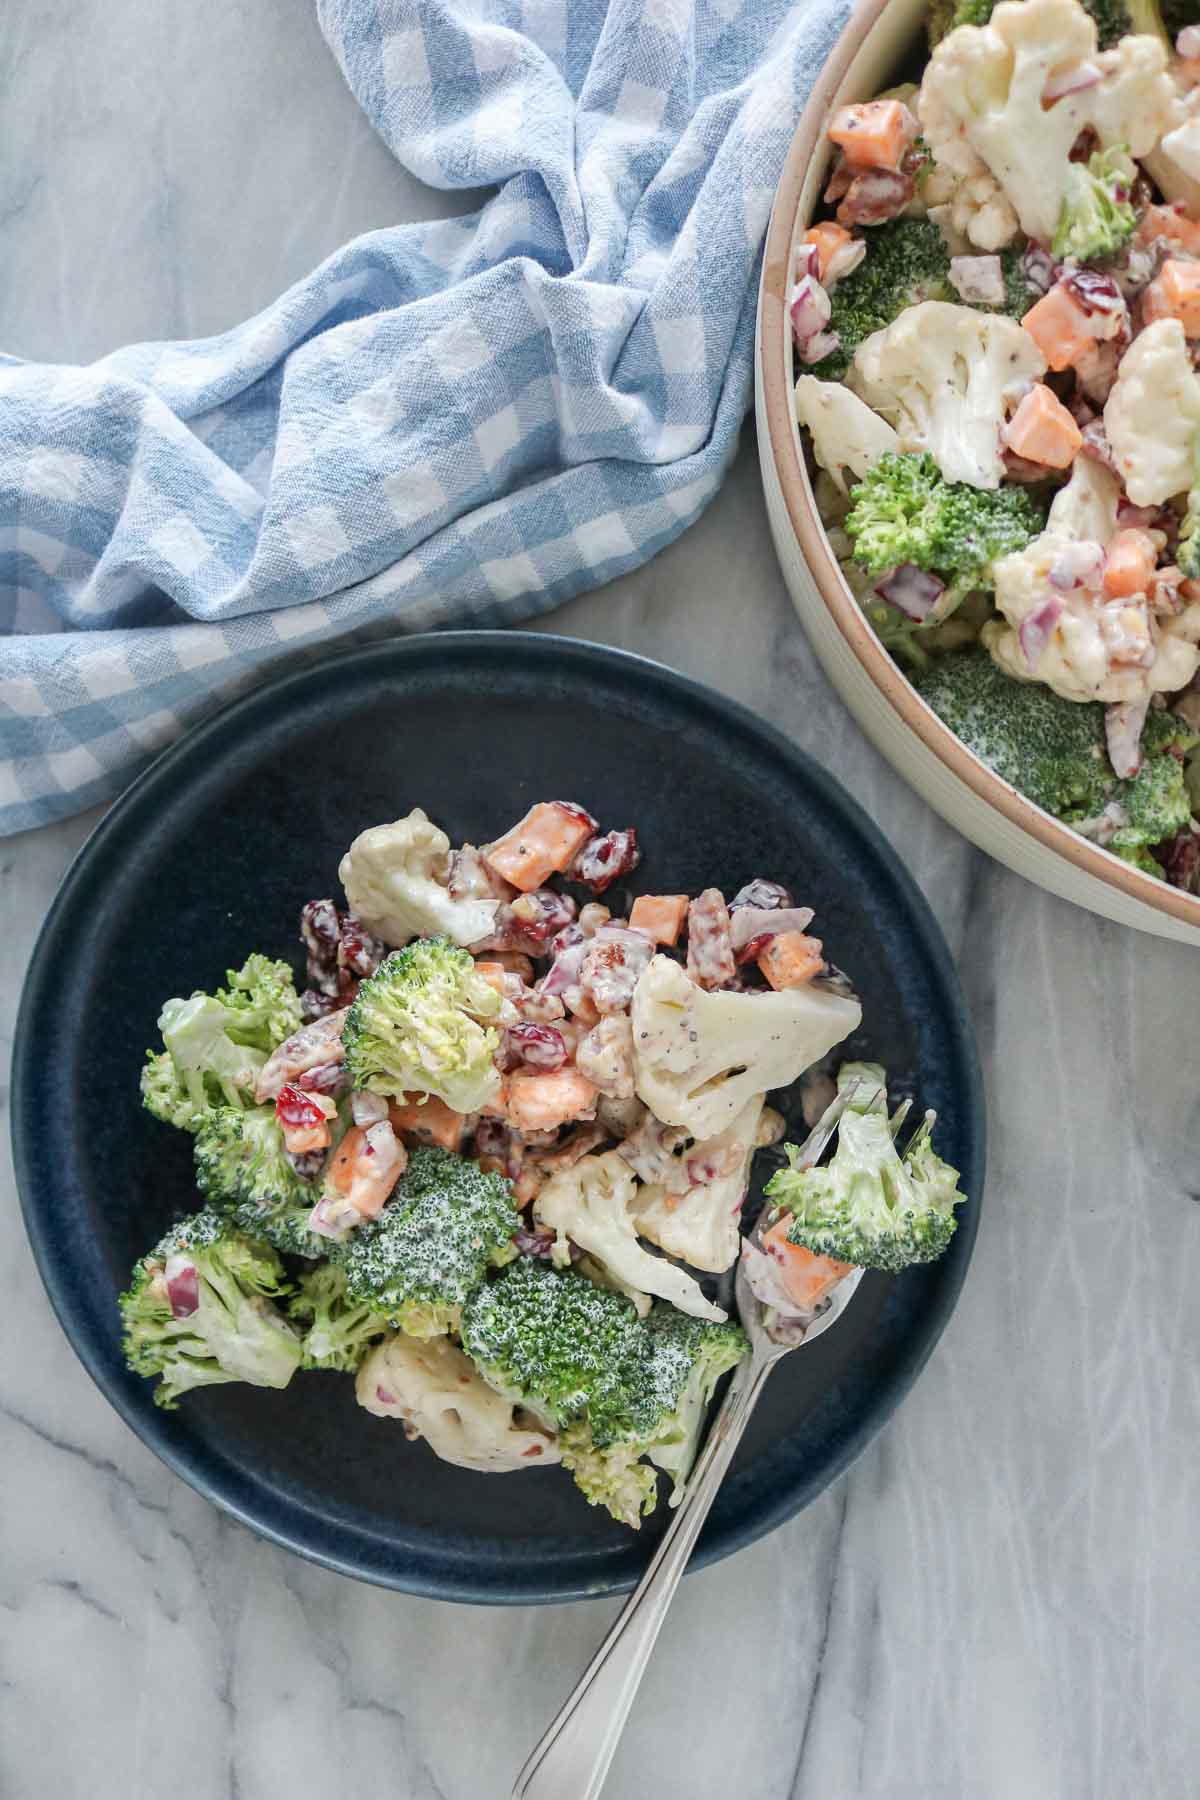 Cauliflower broccoli salad: some in a serving dish and some on a plate with a fork.